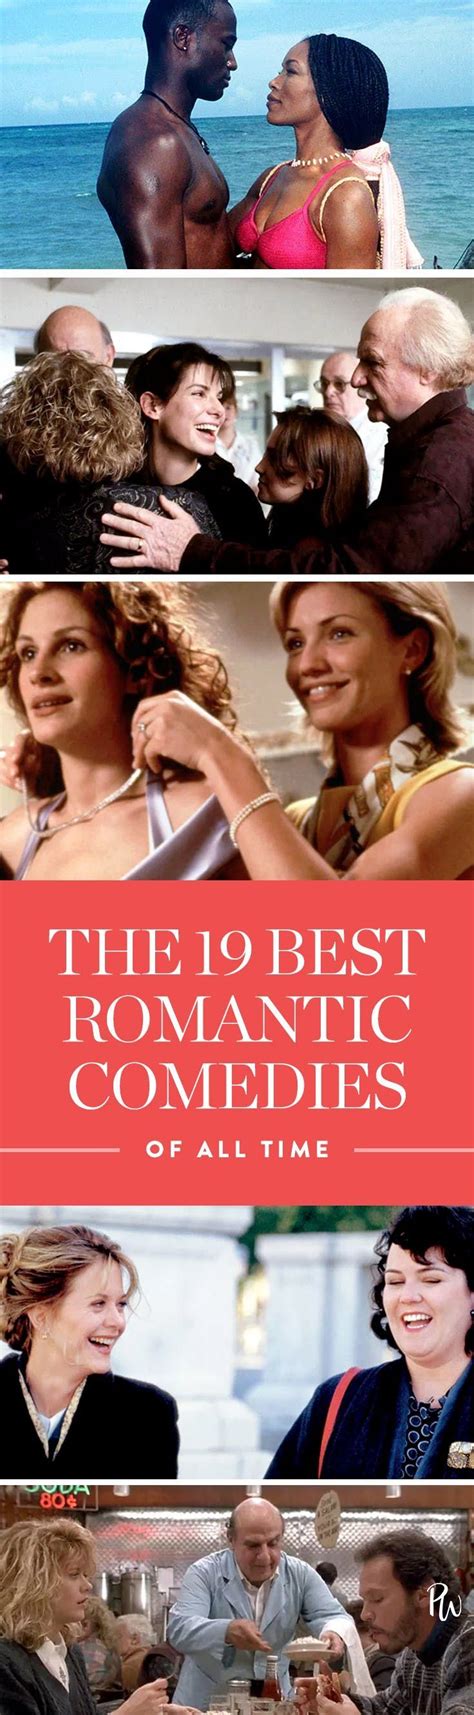 11 best romantic comedies of all time tvbee photos